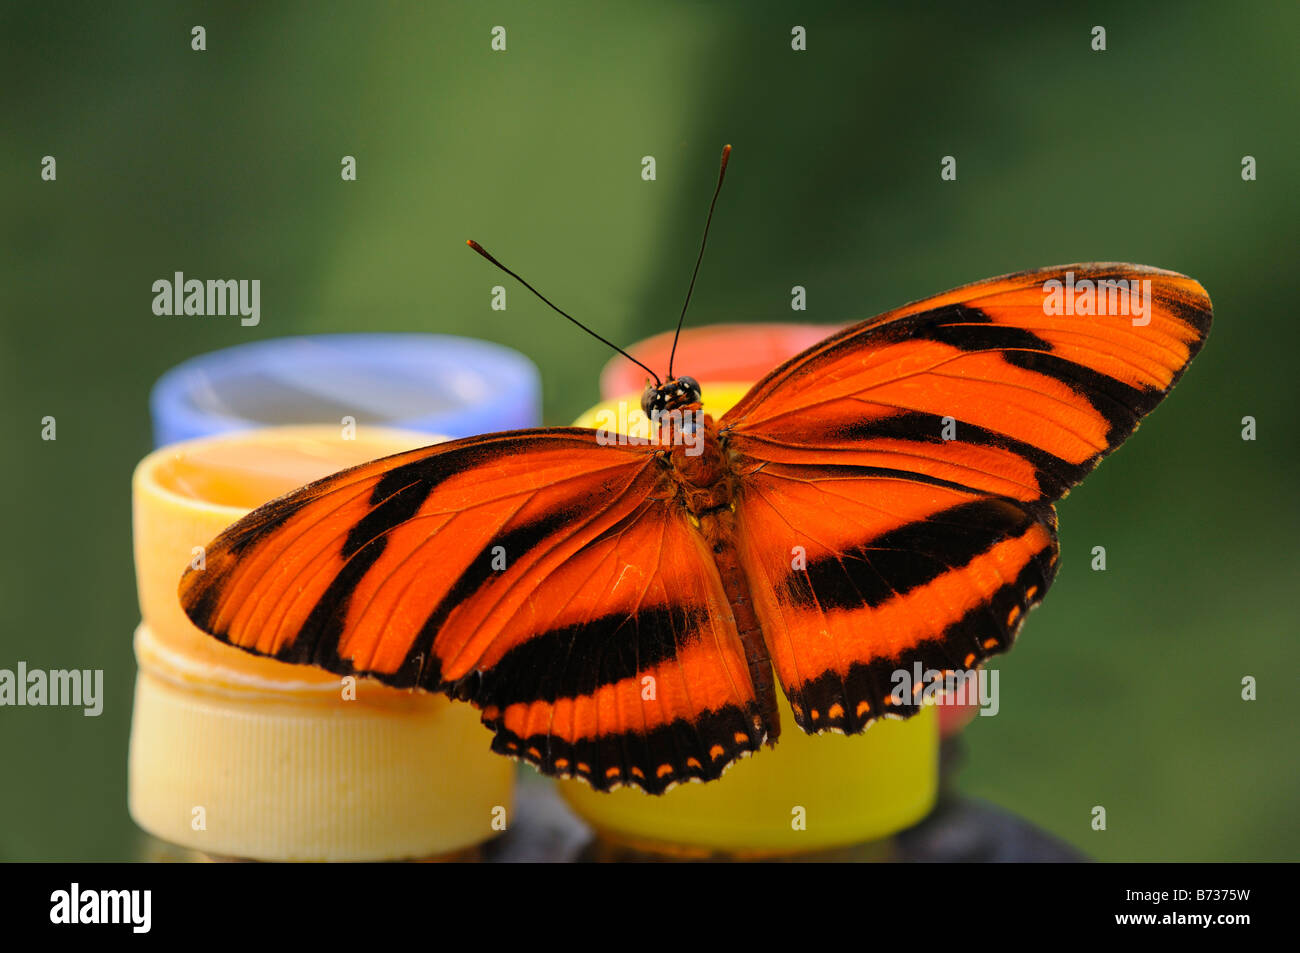 Banded Orange Tiger butterfly, Dryadula phaetusa, at a butterfly feeder Stock Photo